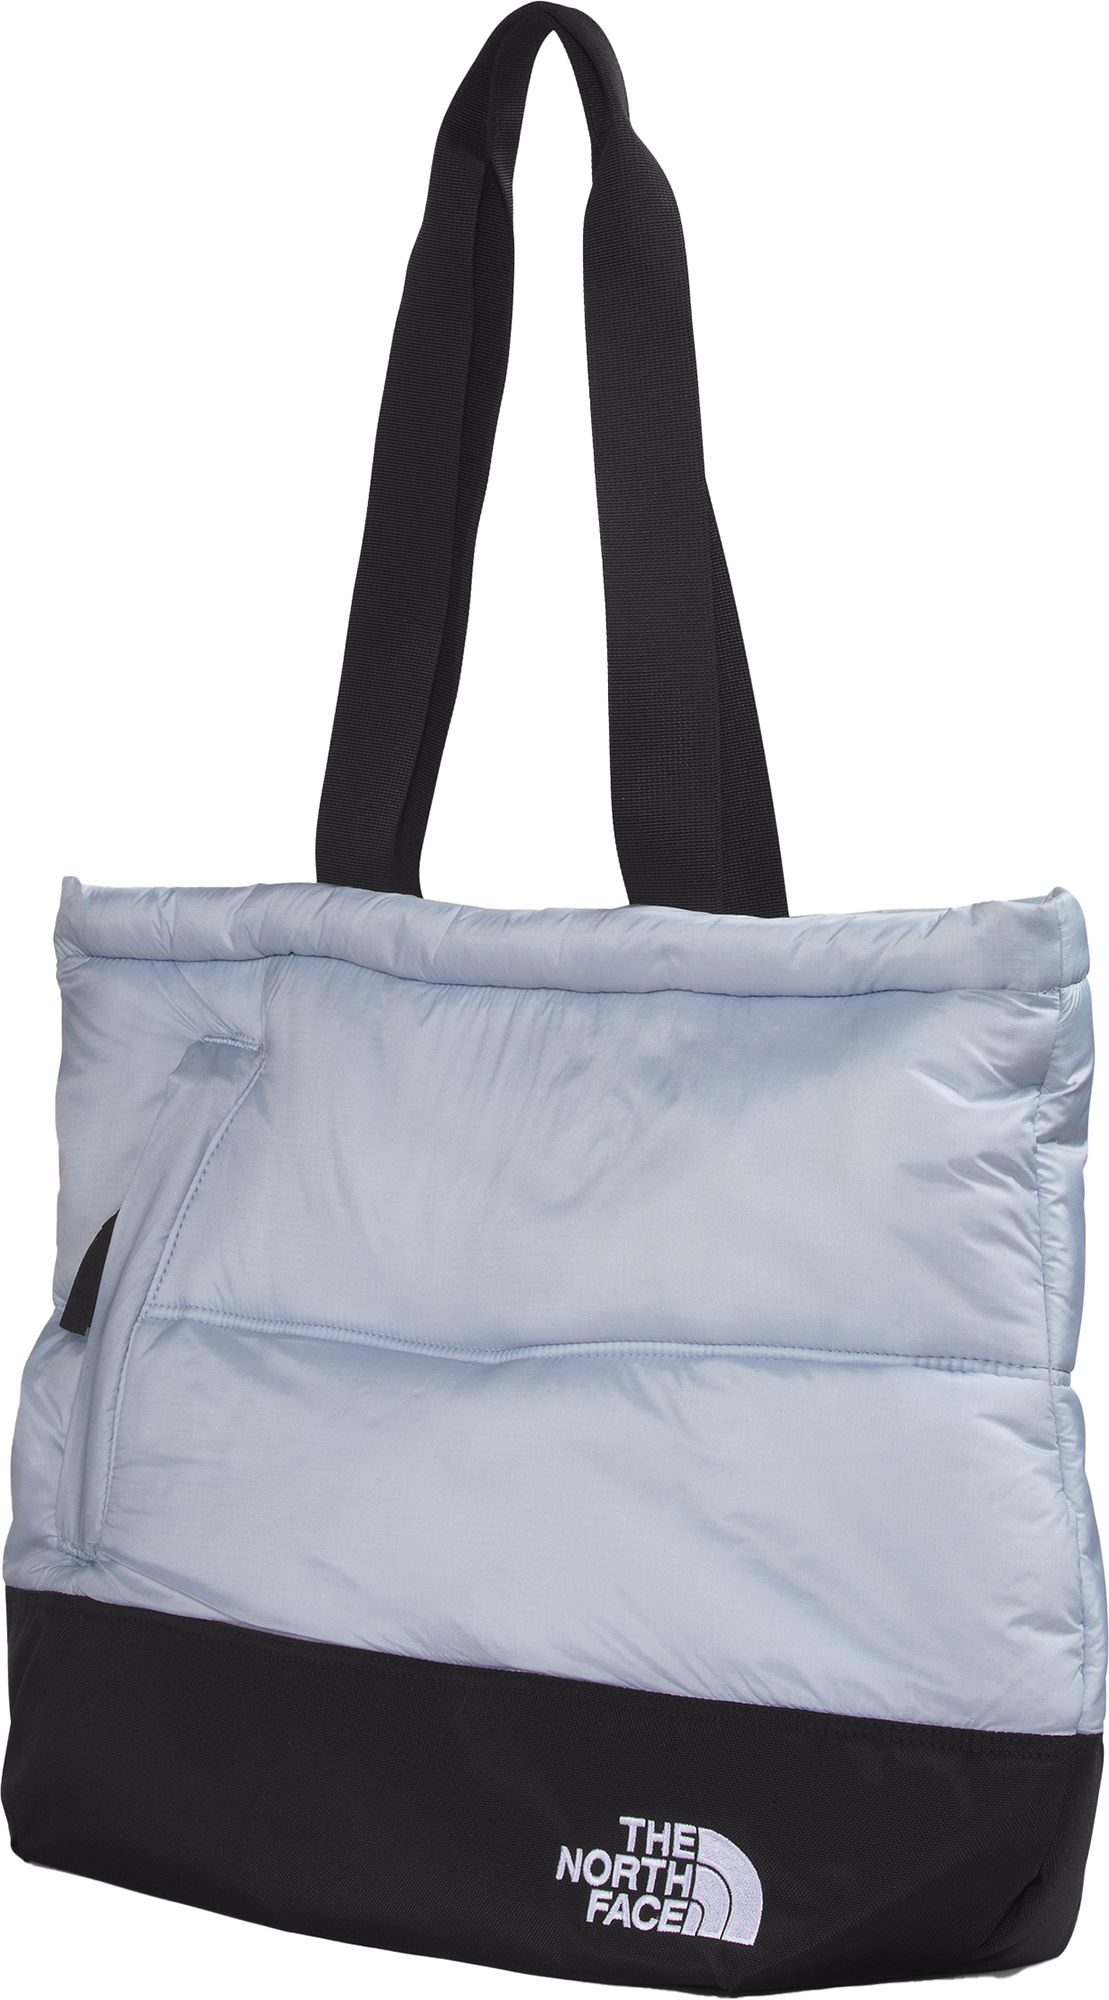 Photos - Suitcase / Backpack Cover The North Face Nuptse Tote, Men's, Dusty Periwinkle/Tnf Blk | Father's Day 